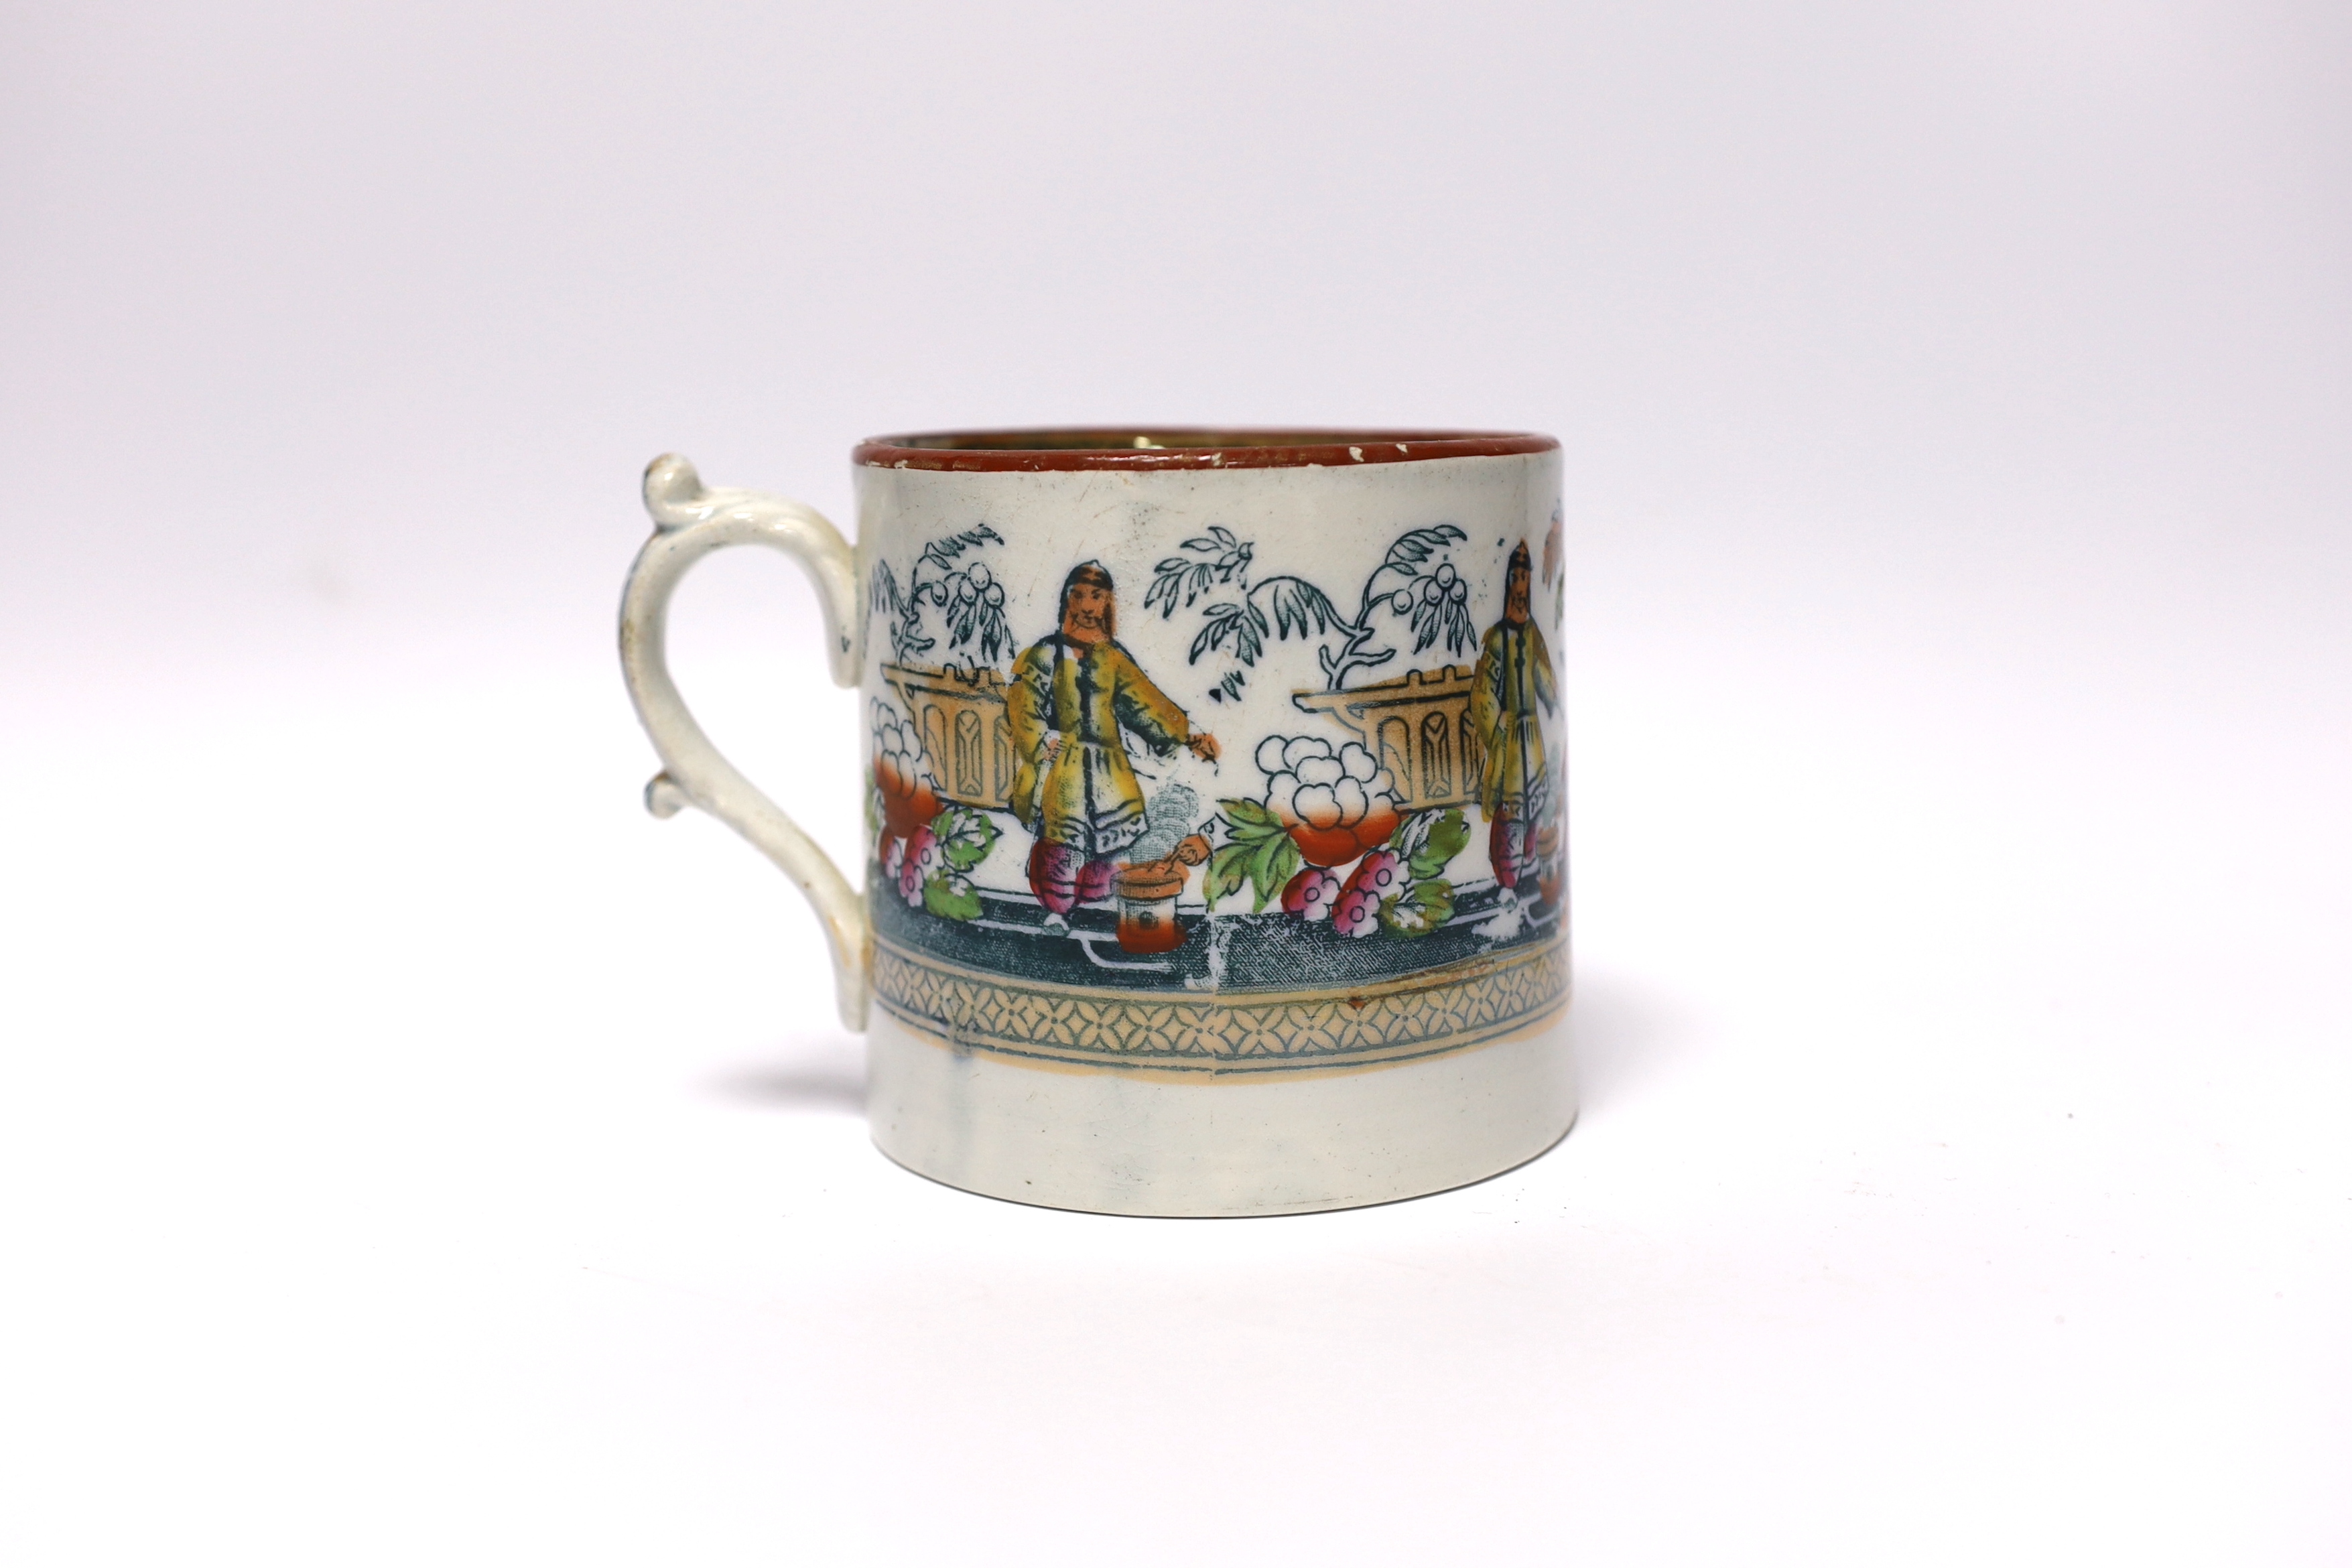 A mid 19th century Staffordshire ironstone cylindrical large tankard decorated with Chinese figures and motifs (E and H), 10cm